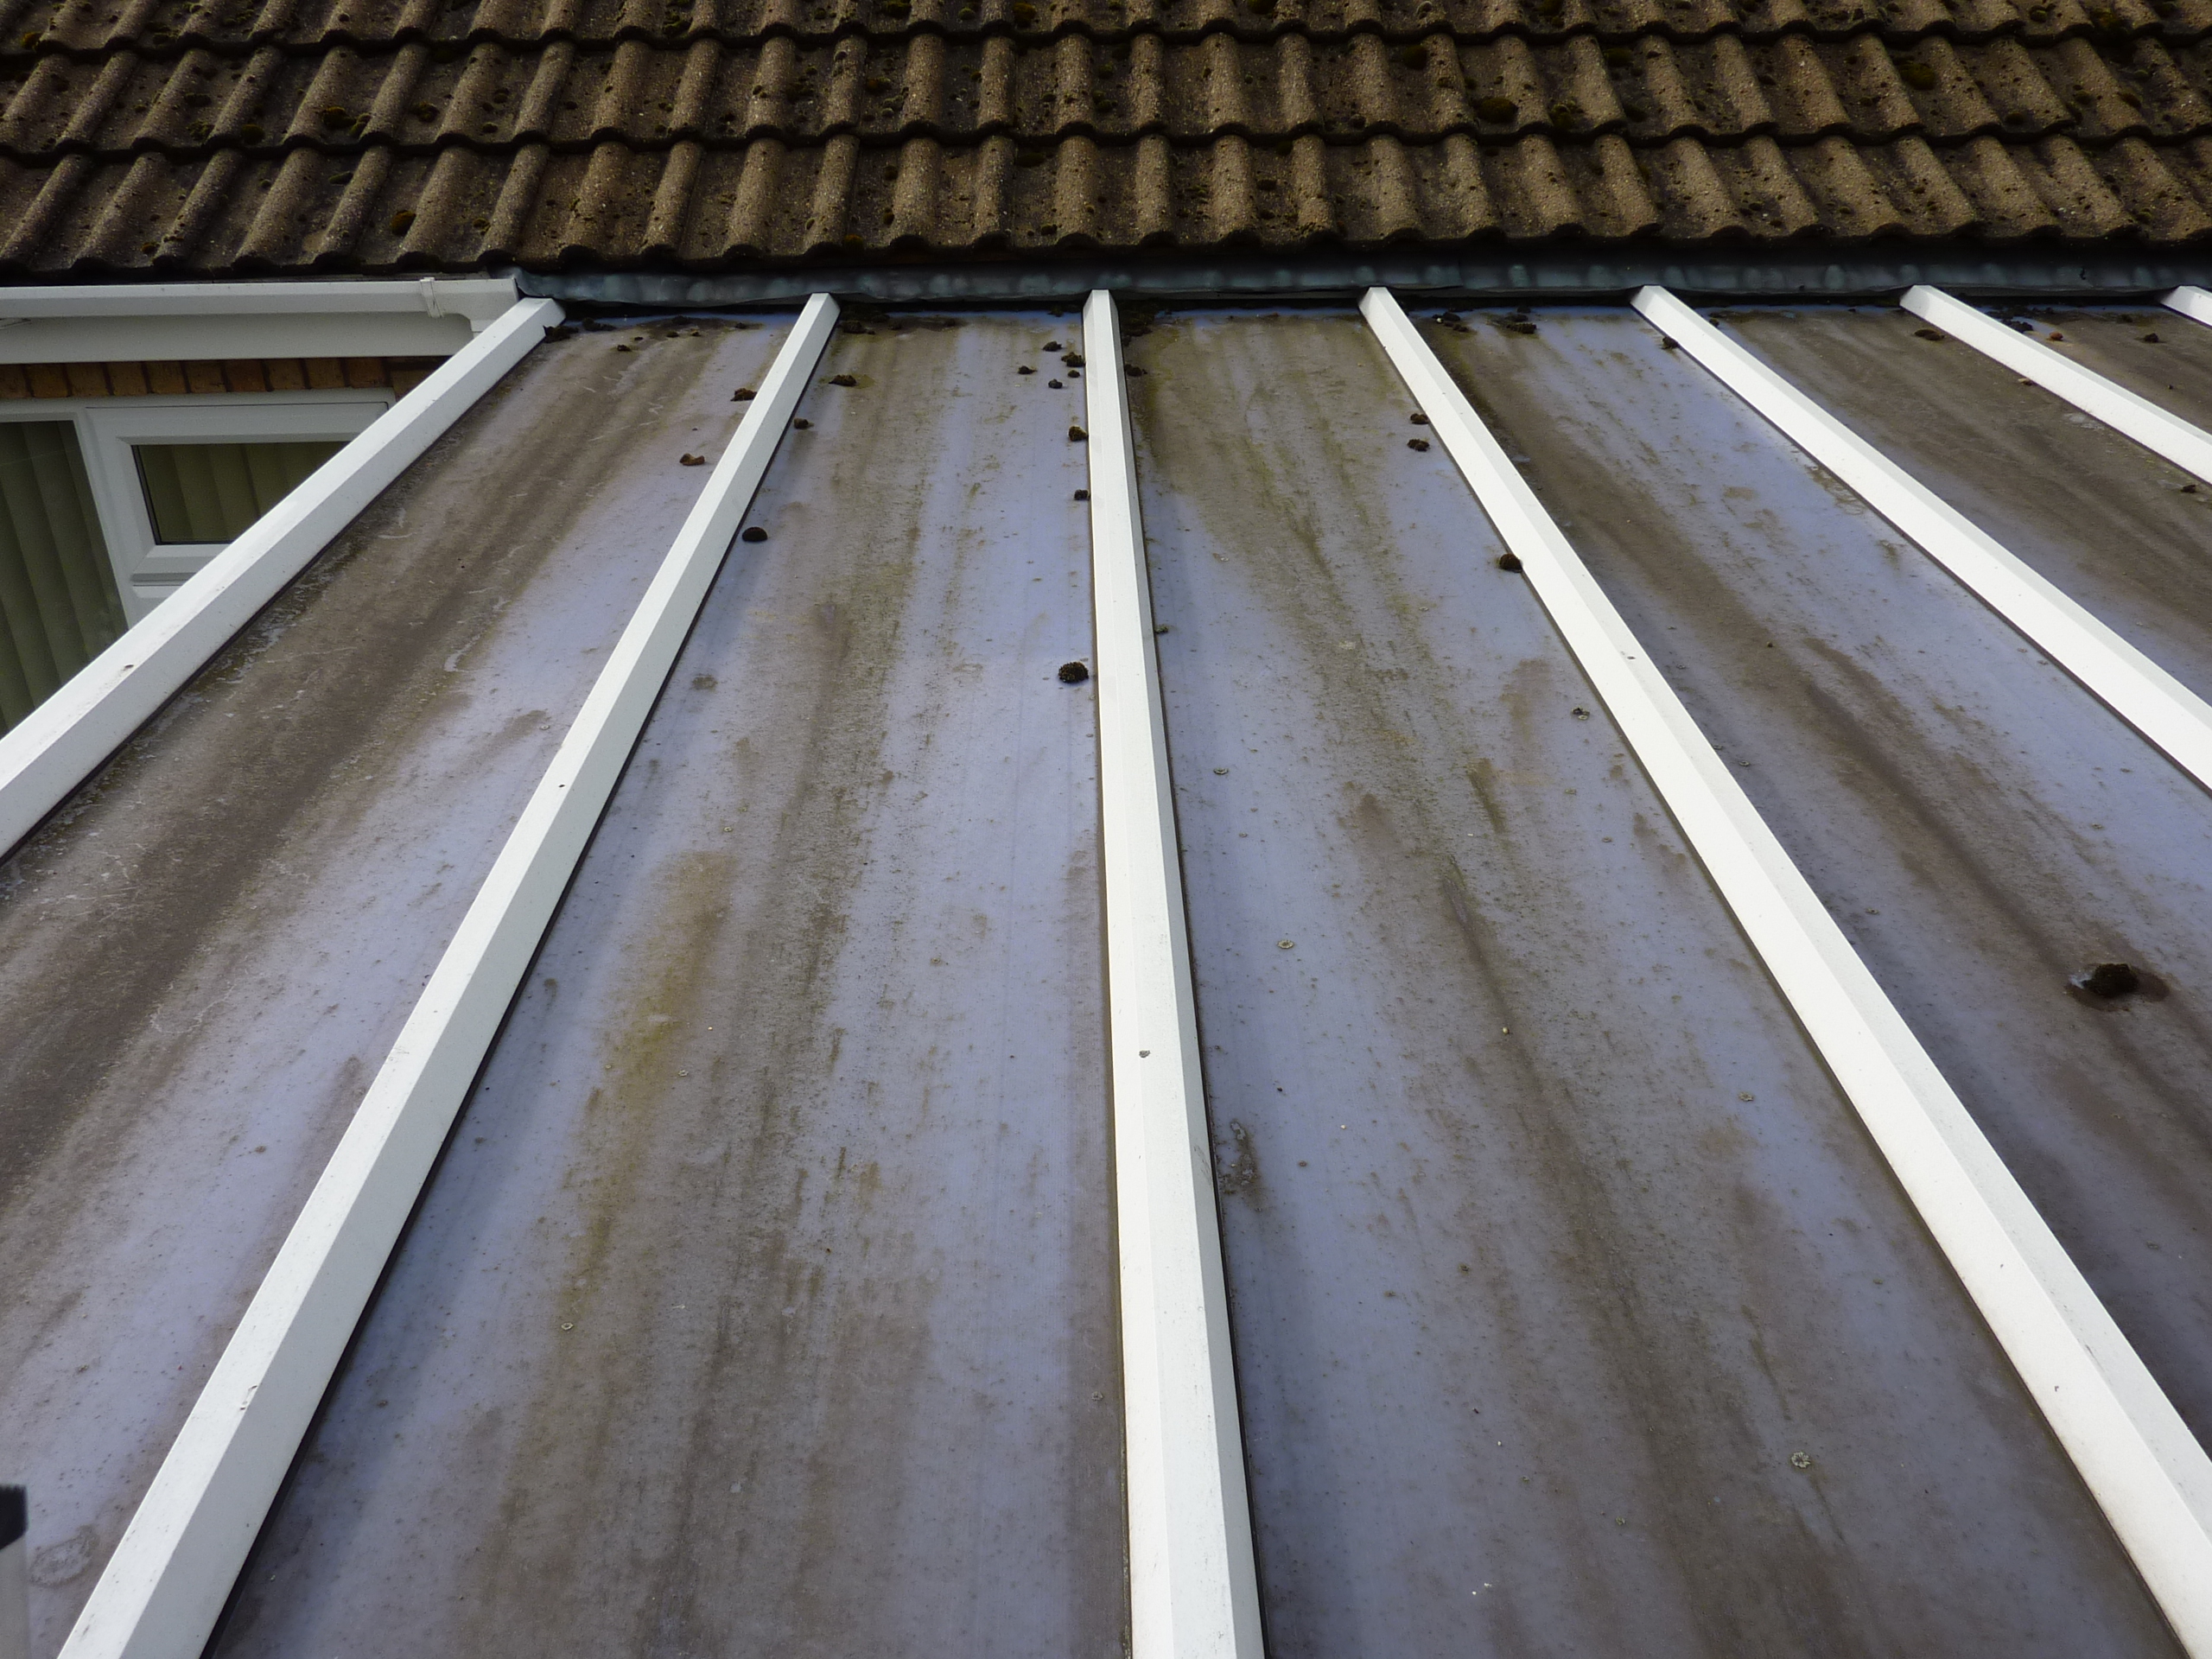 conservatory roof Cleaning - Moss Removalmber